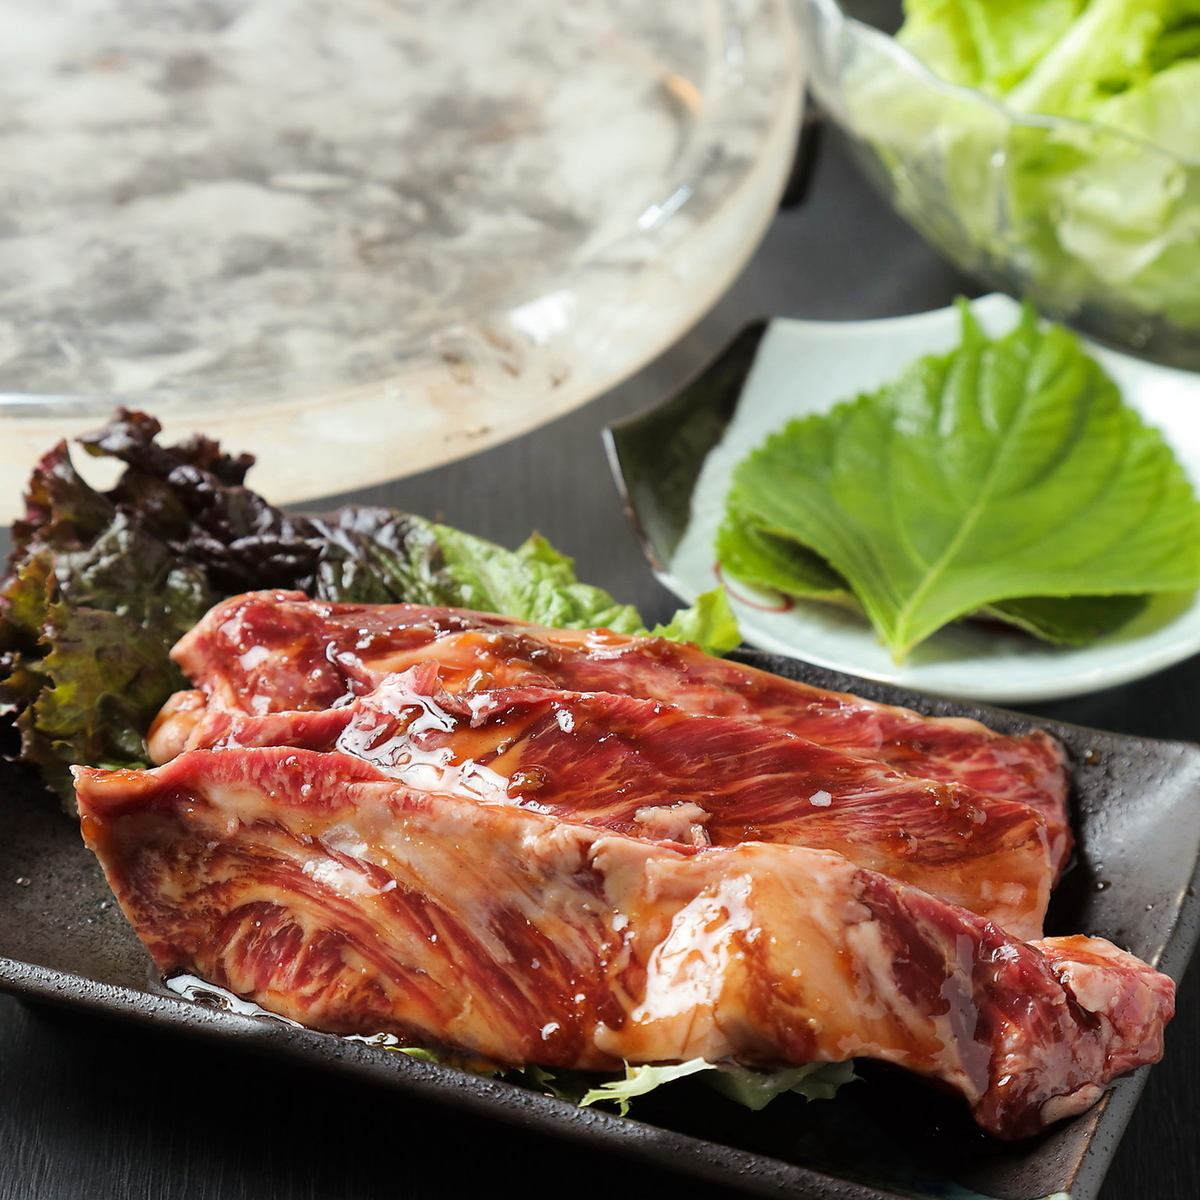 In particular, the Yangnyeong Galbi is extremely popular and is a must-try dish.